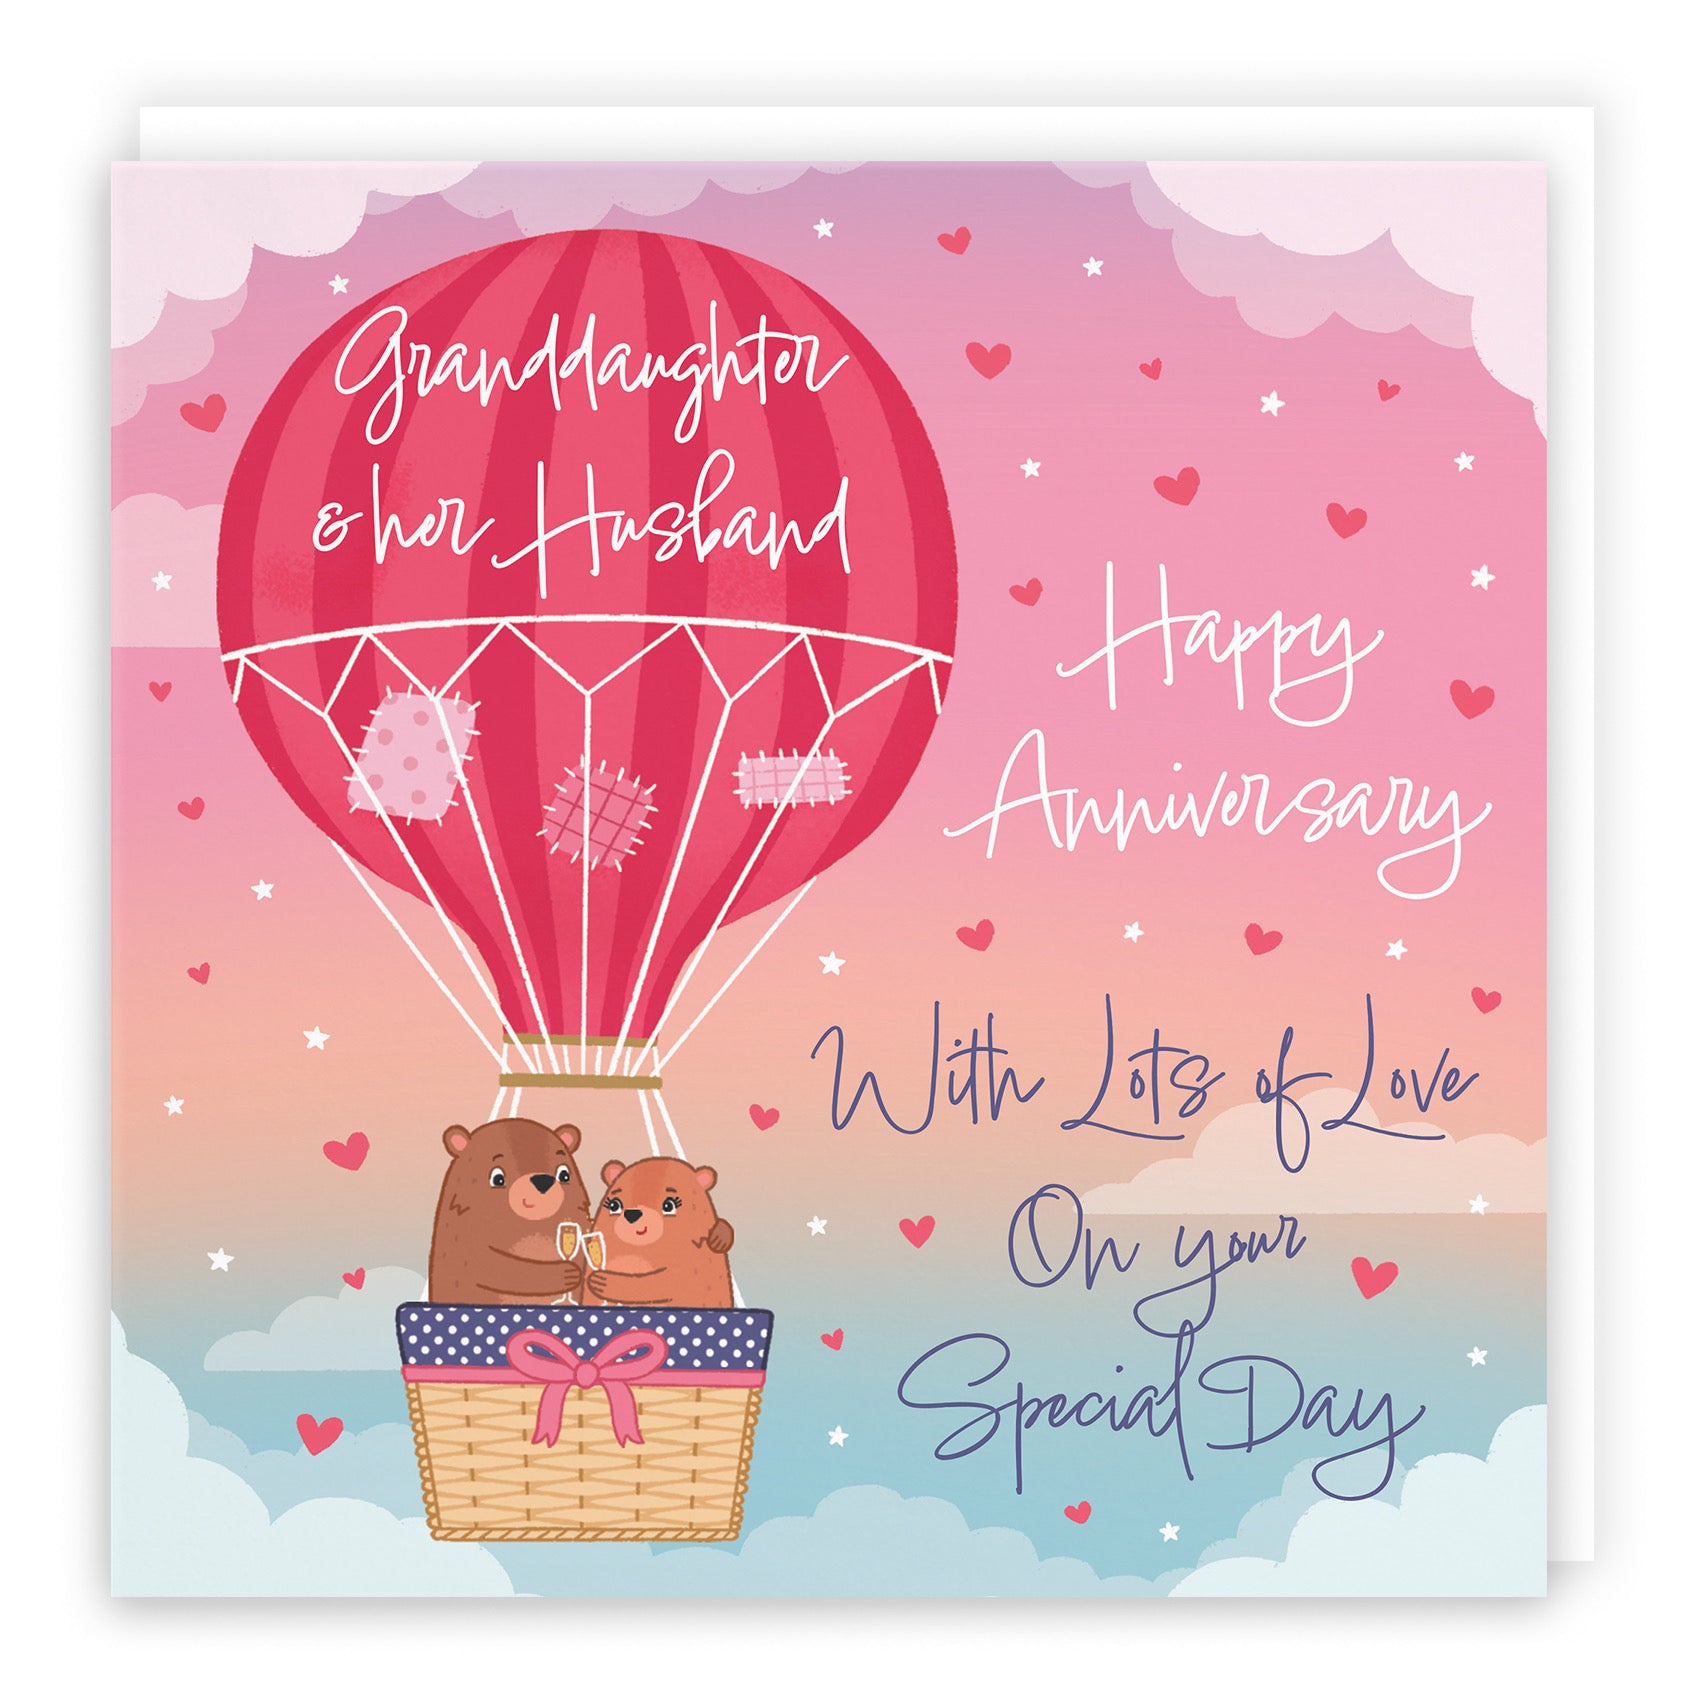 Large Granddaughter And Husband Hot Air Balloon Anniversary Card Cute Bears - Default Title (B0CXY1928Y)